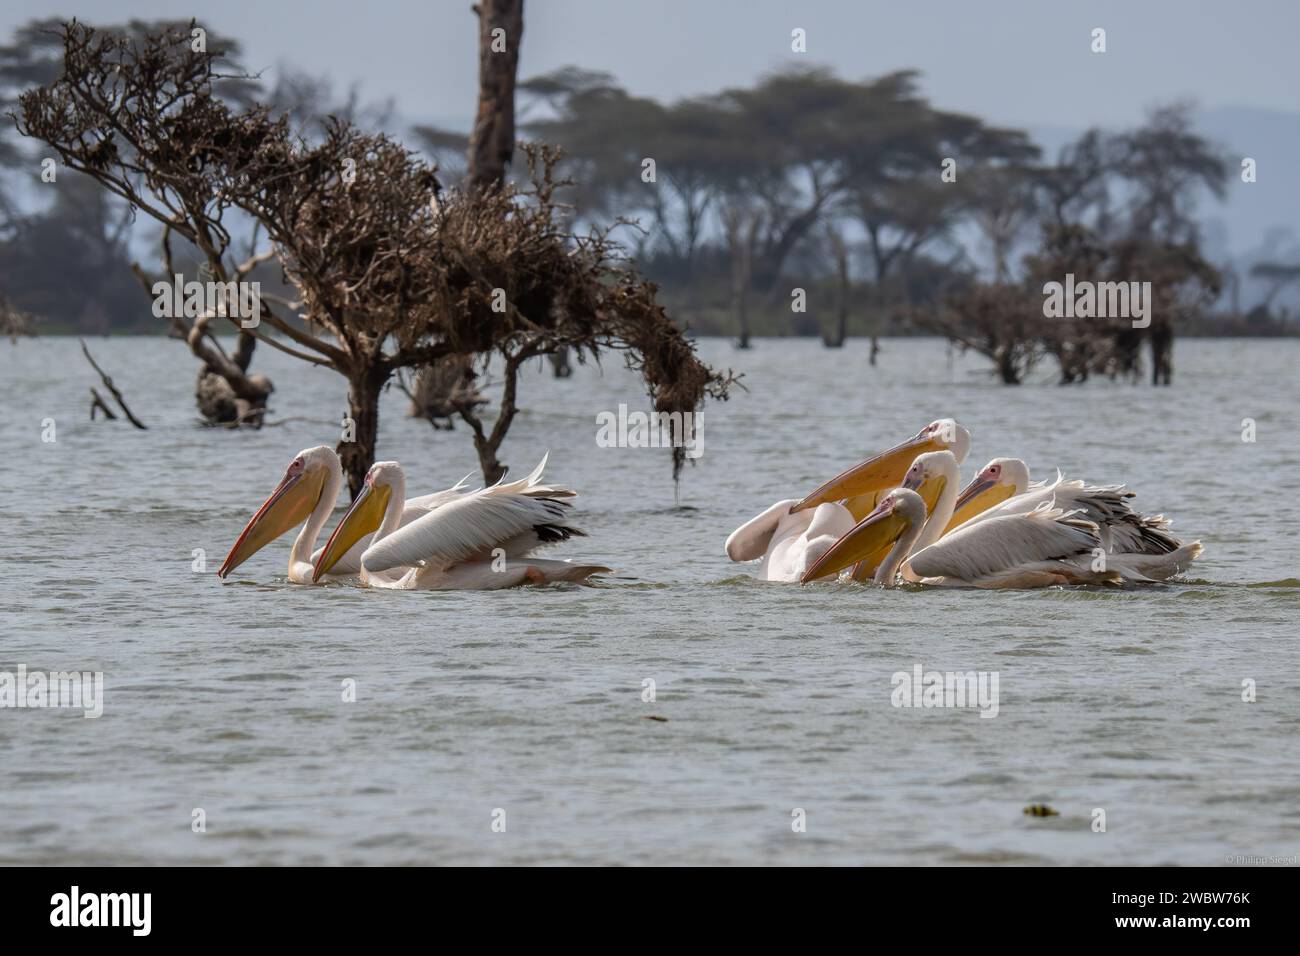 A group of pelicans gracefully glide across the calm waters, their eyes keenly scanning the surface for sustenance Stock Photo